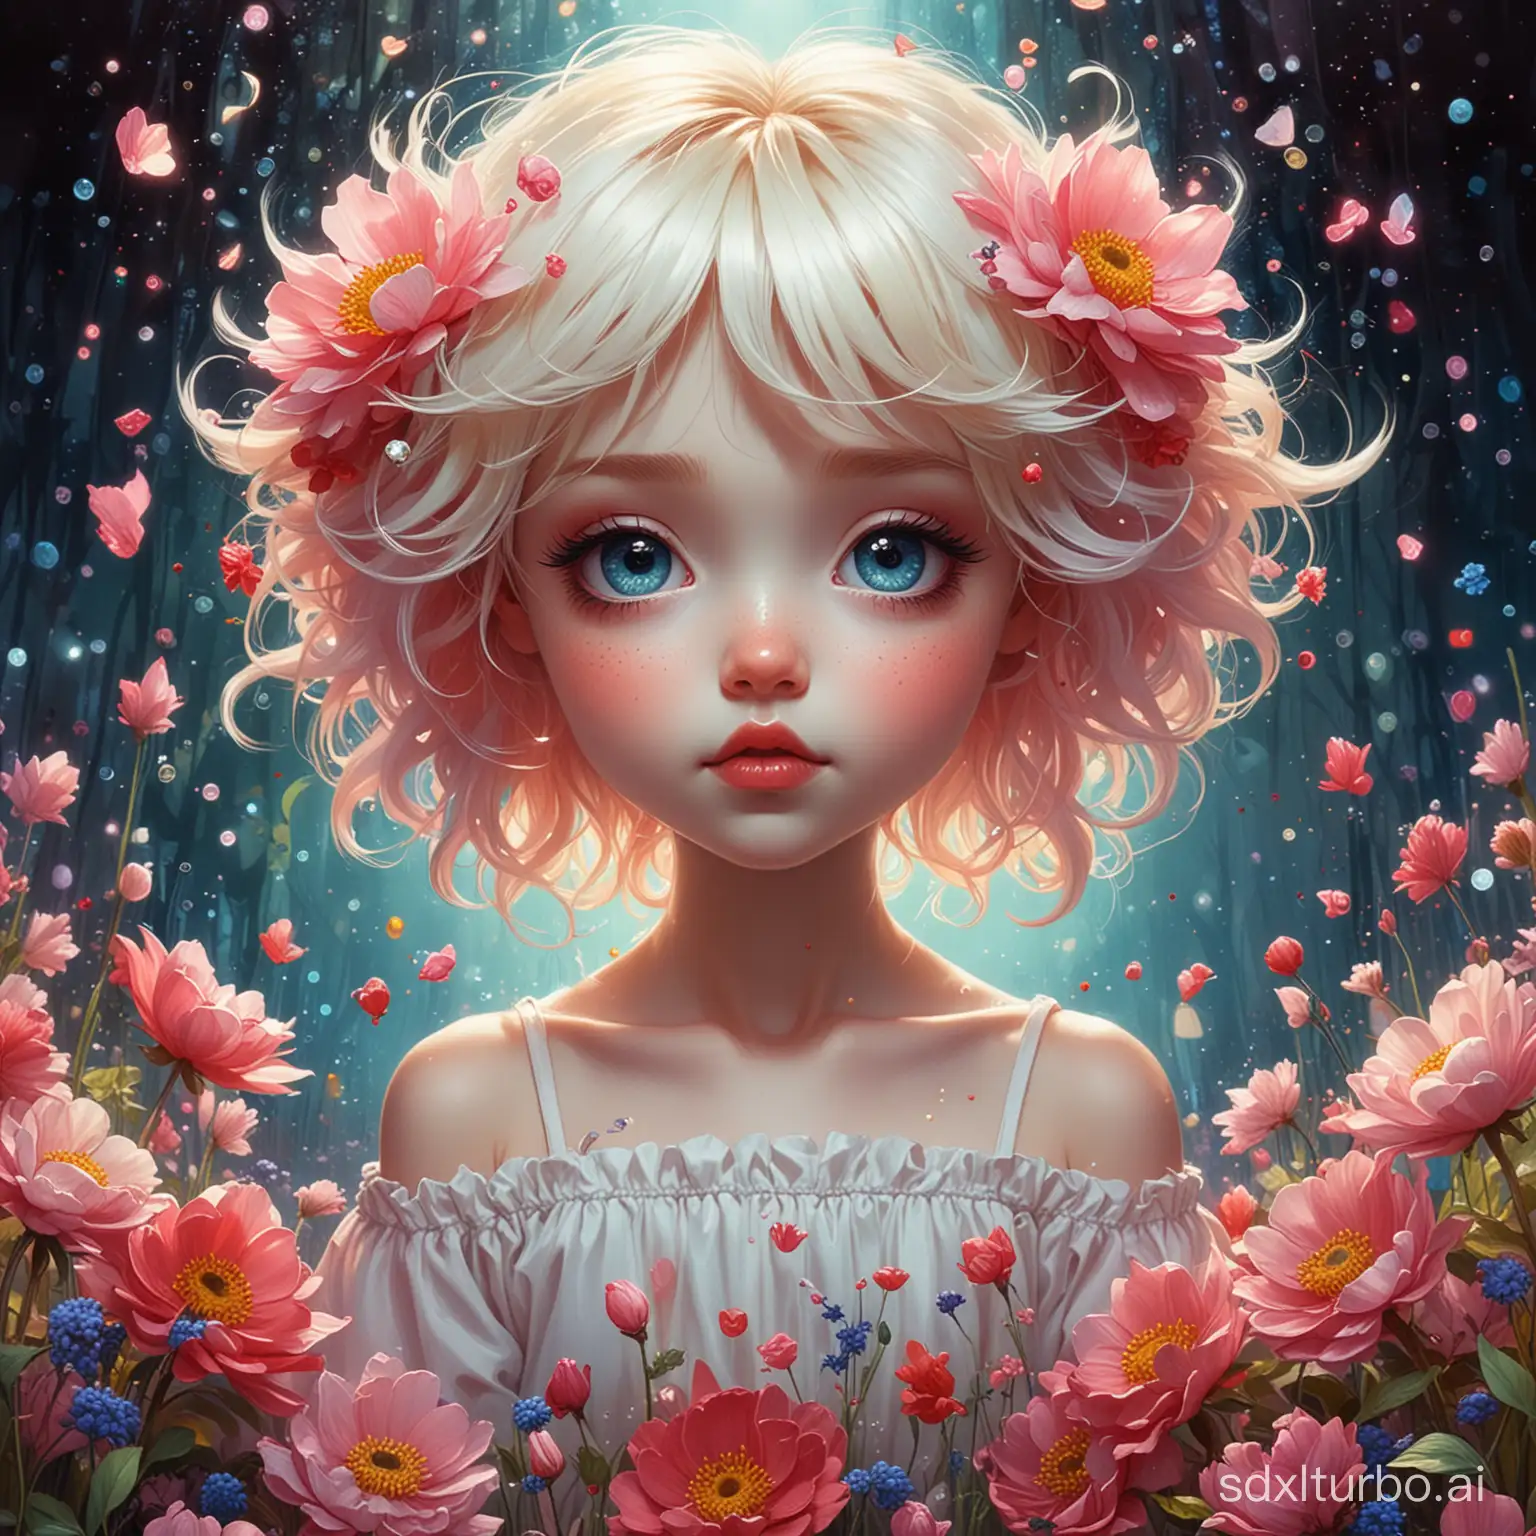 Chibi anime style
art by Yvonne Coomber
art by Meghan Howland
Art by Phil Koch